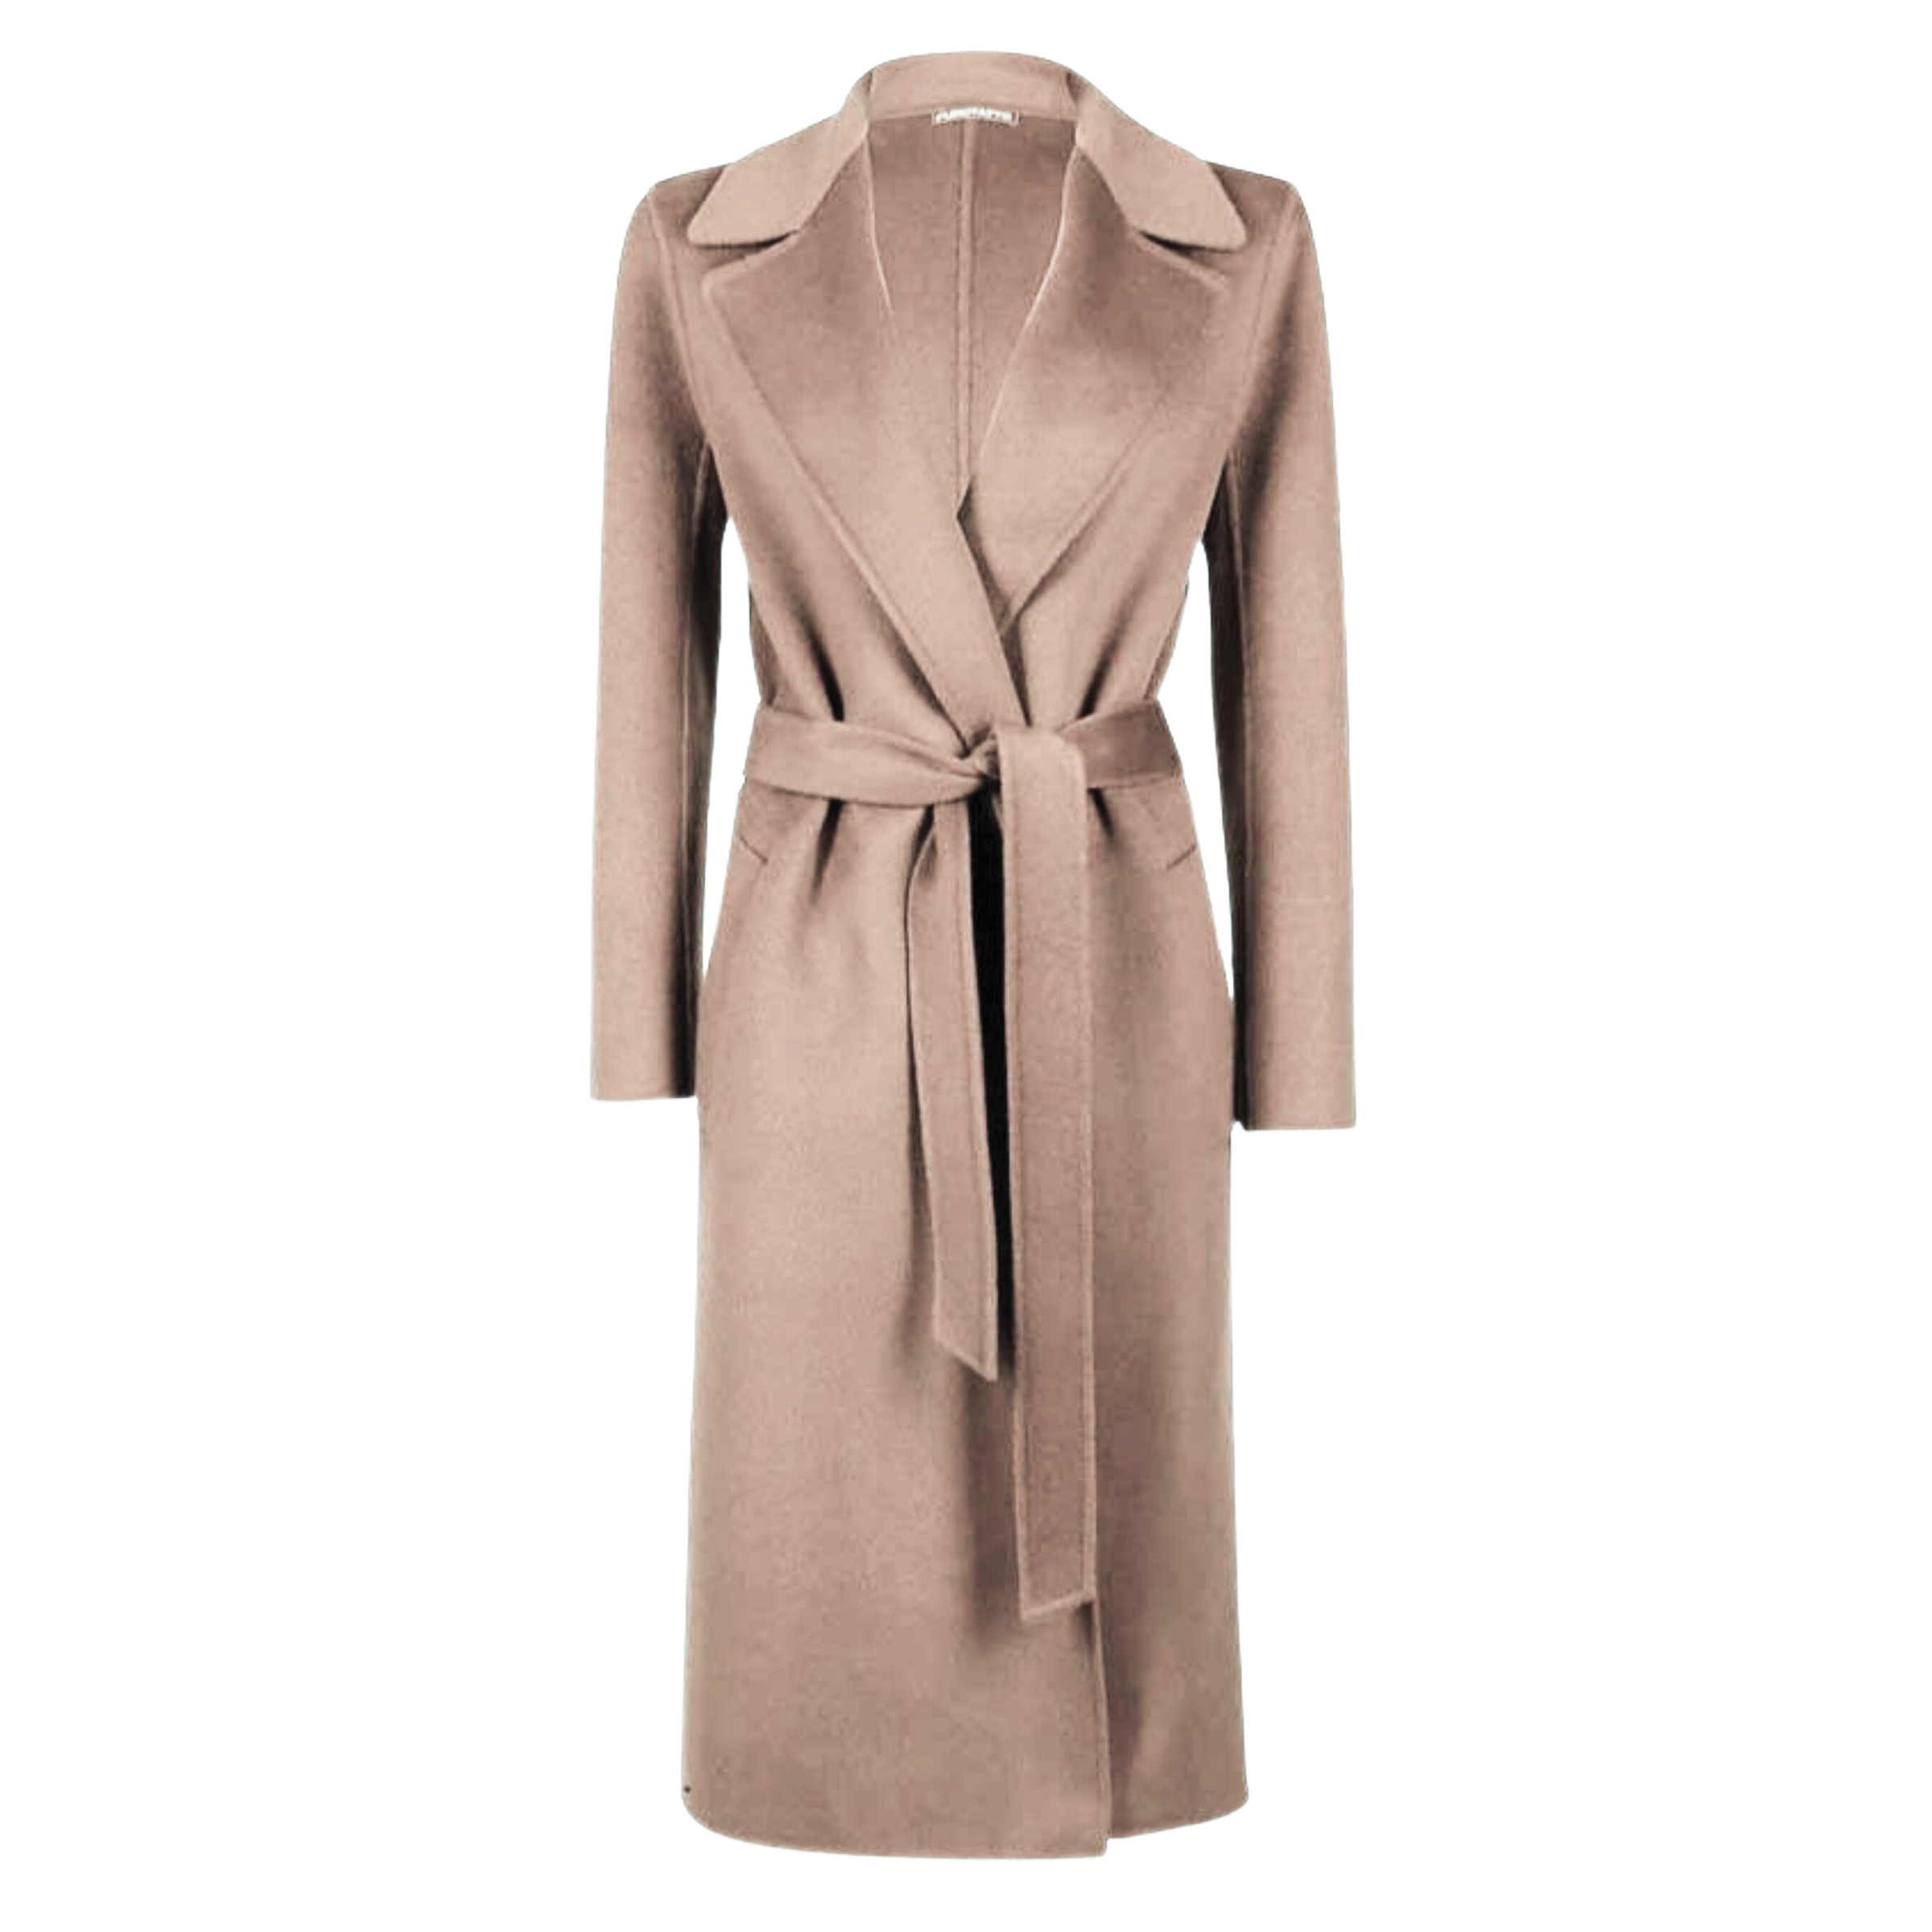 Martha\'s Vineyard and Timeless Cashmere Coat Belted Purotatto Wool